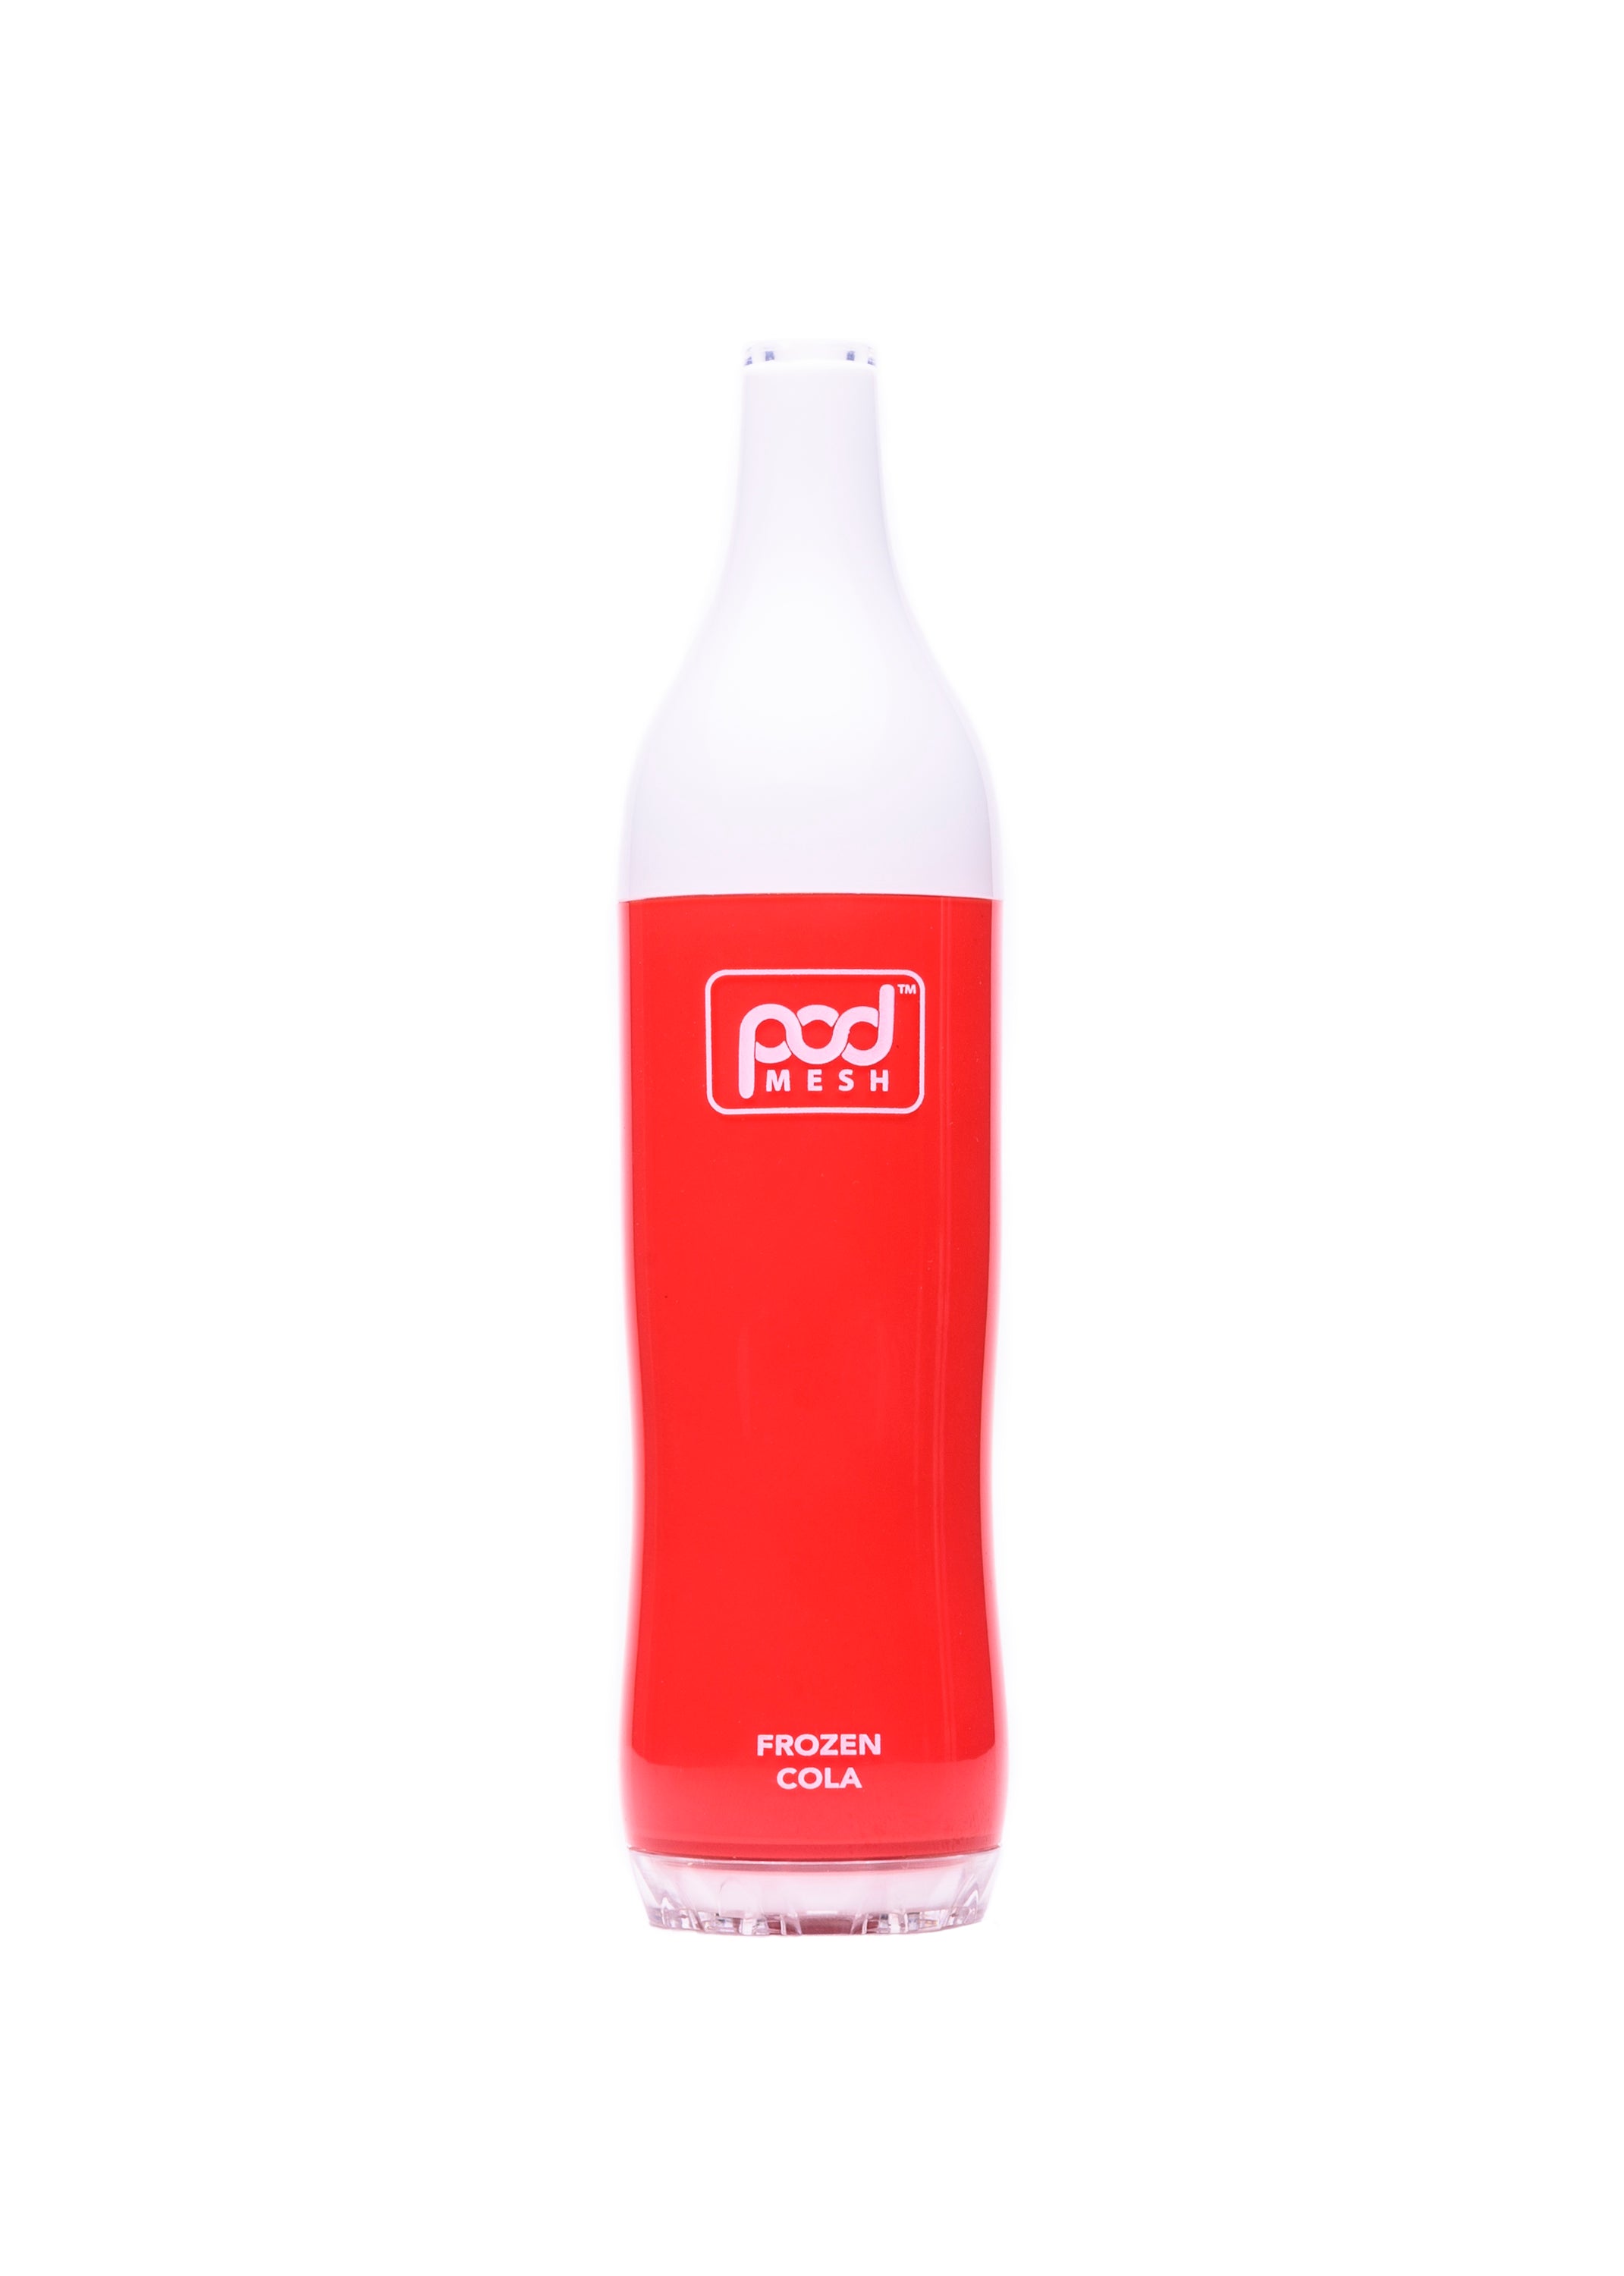 FLO 5.5% DISPOSABLE DEVICE (4000 PUFFS) by POD MESH